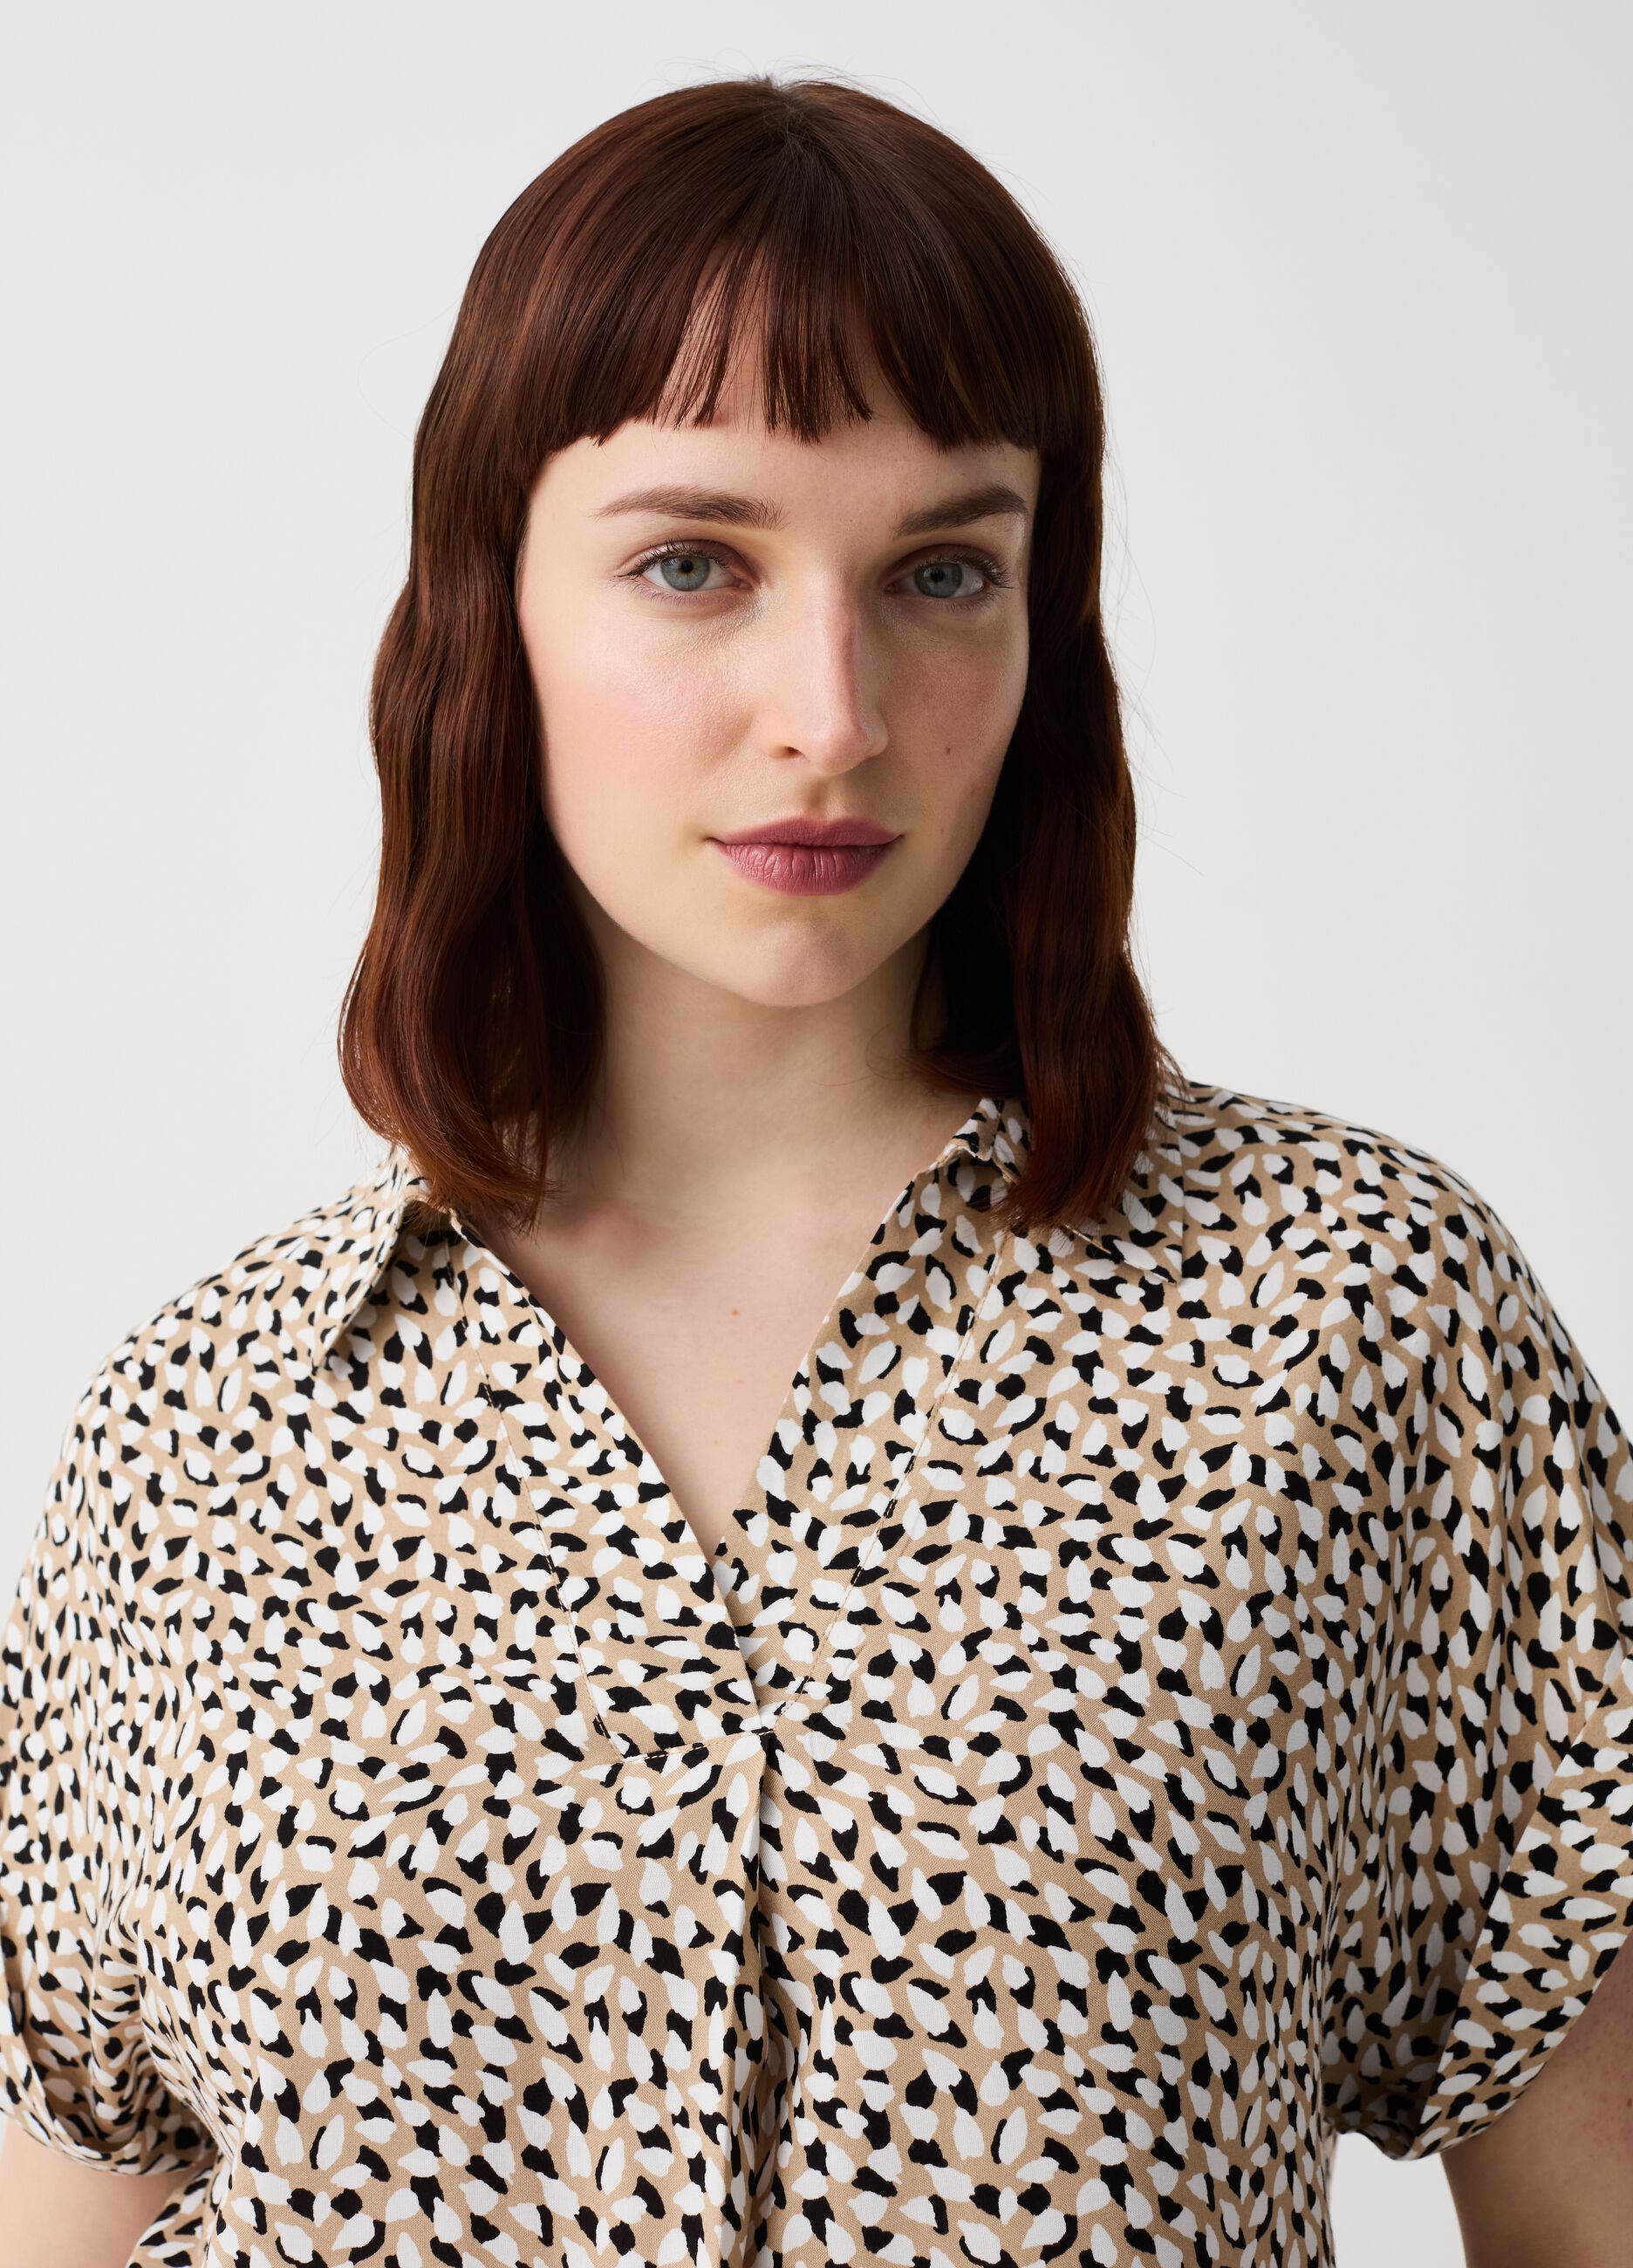 Curvy blouse with speckled print in viscose